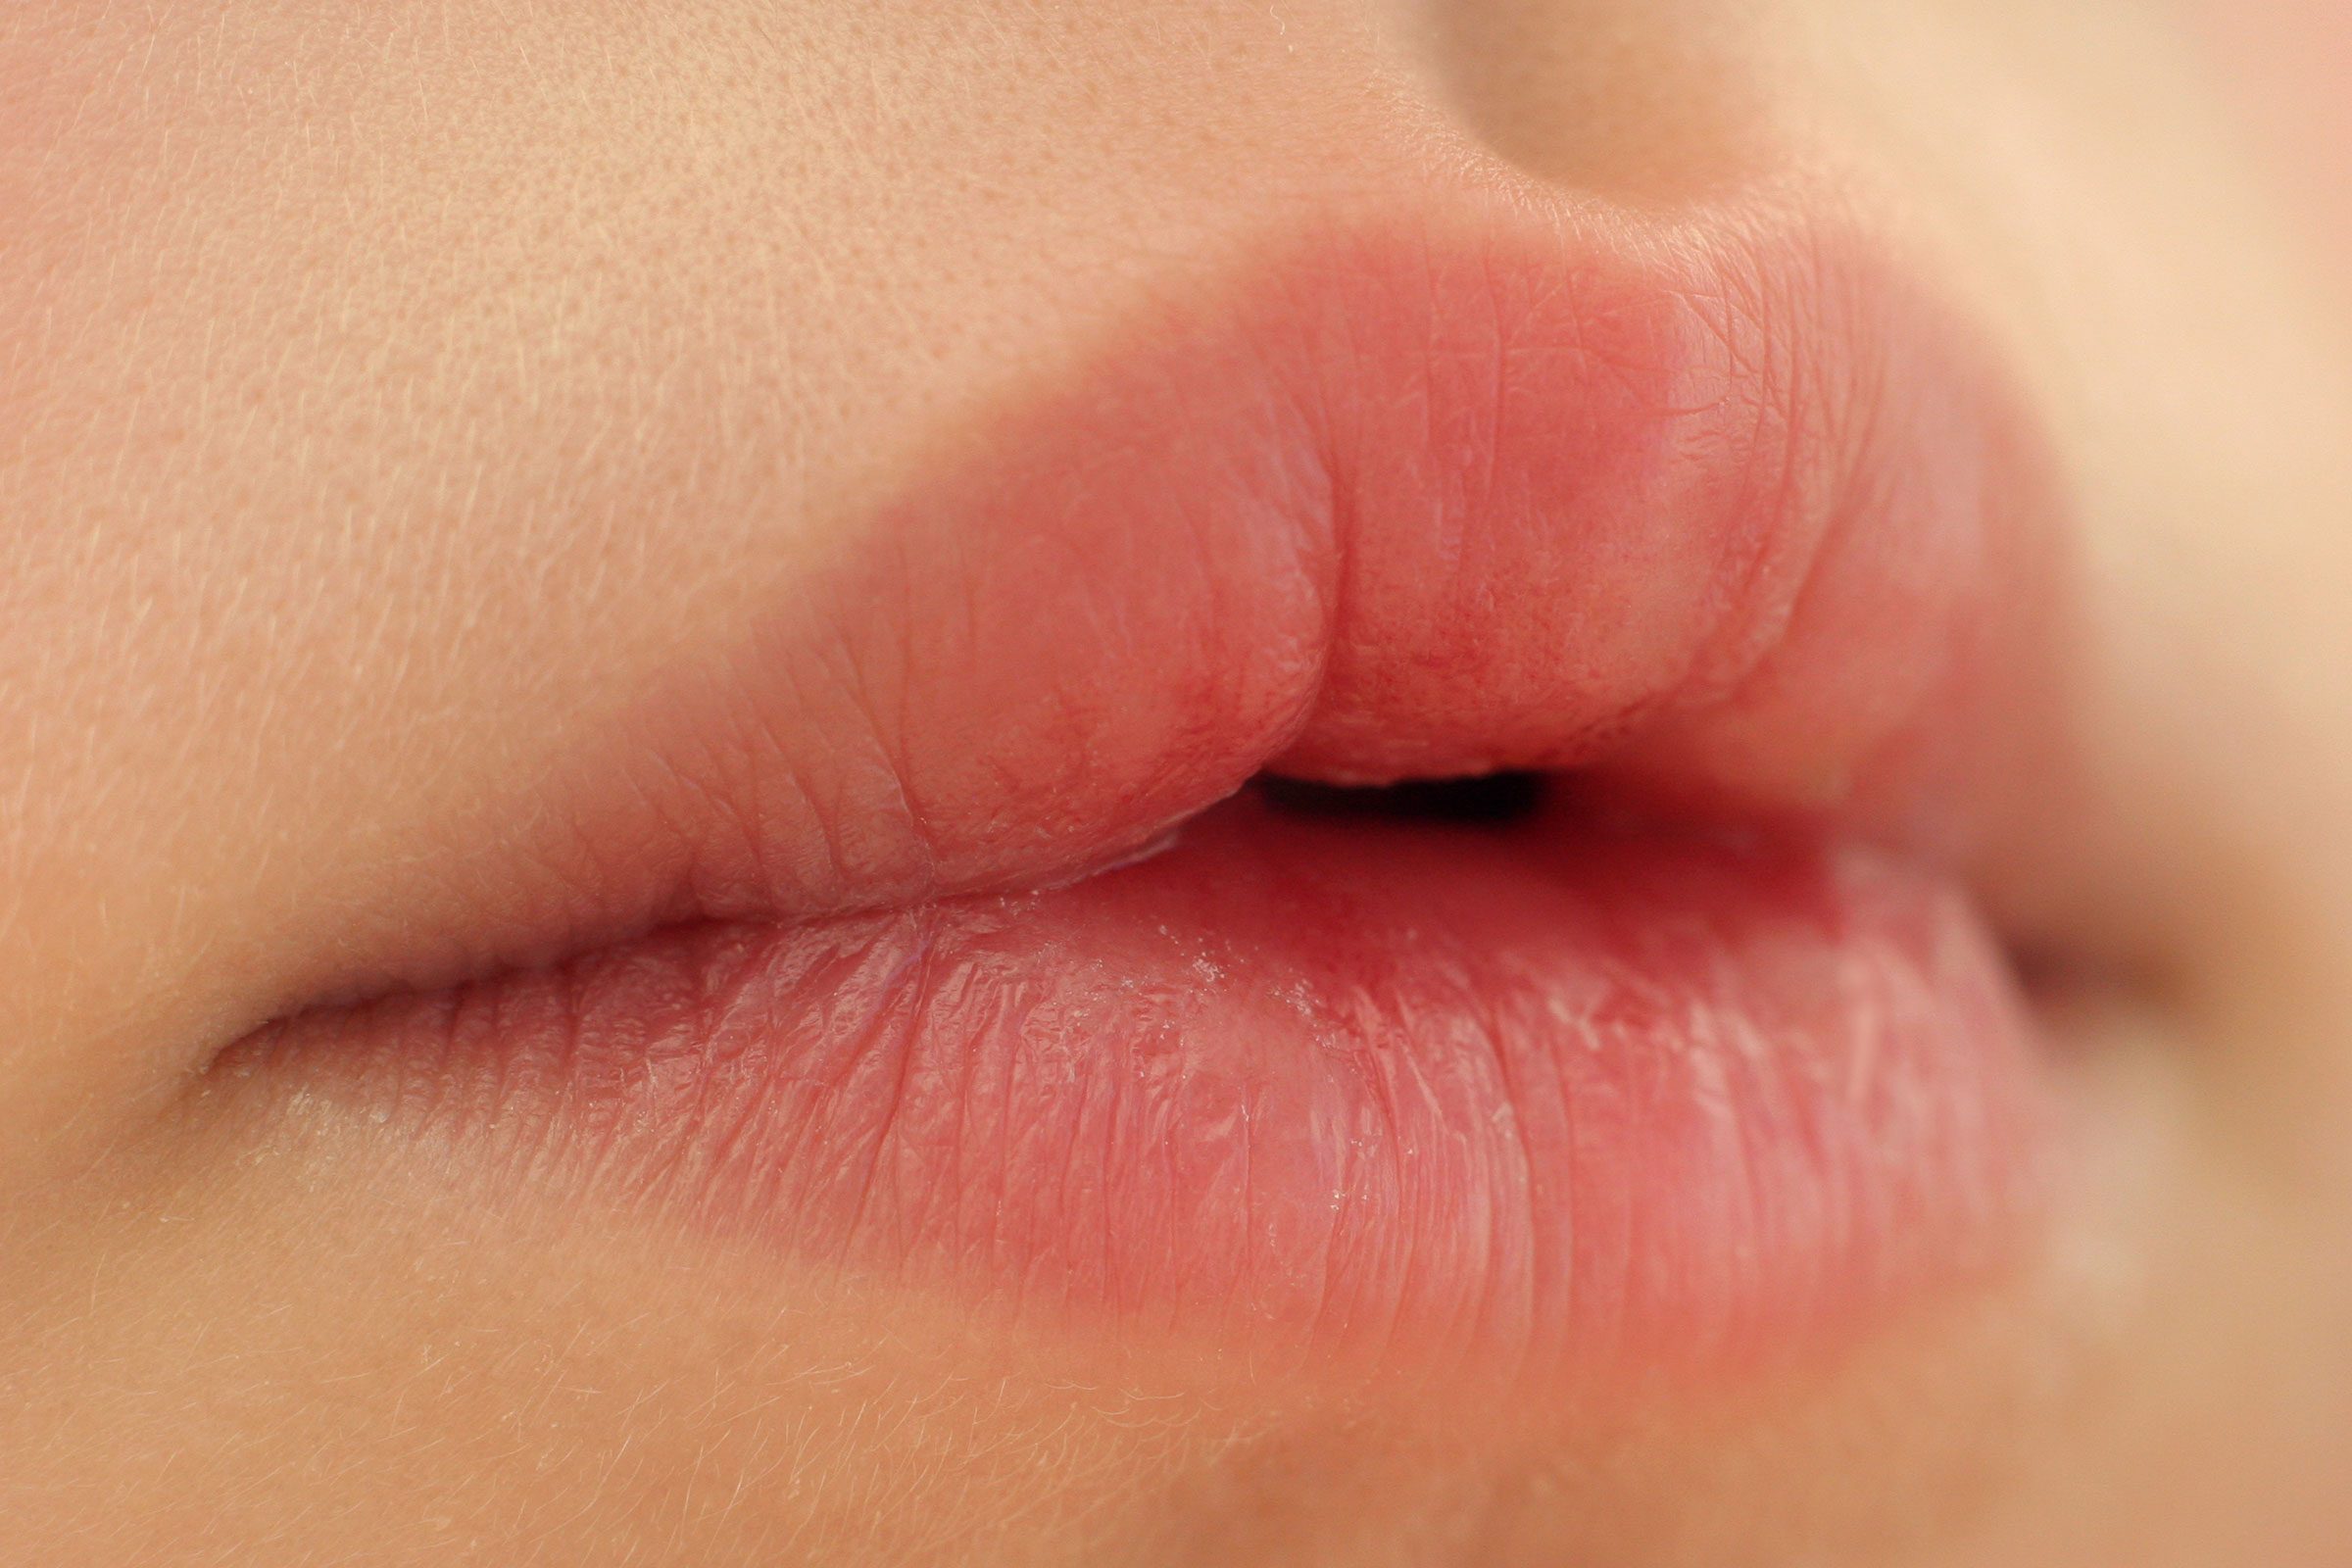 How can you treat chapped lips on a newborn?